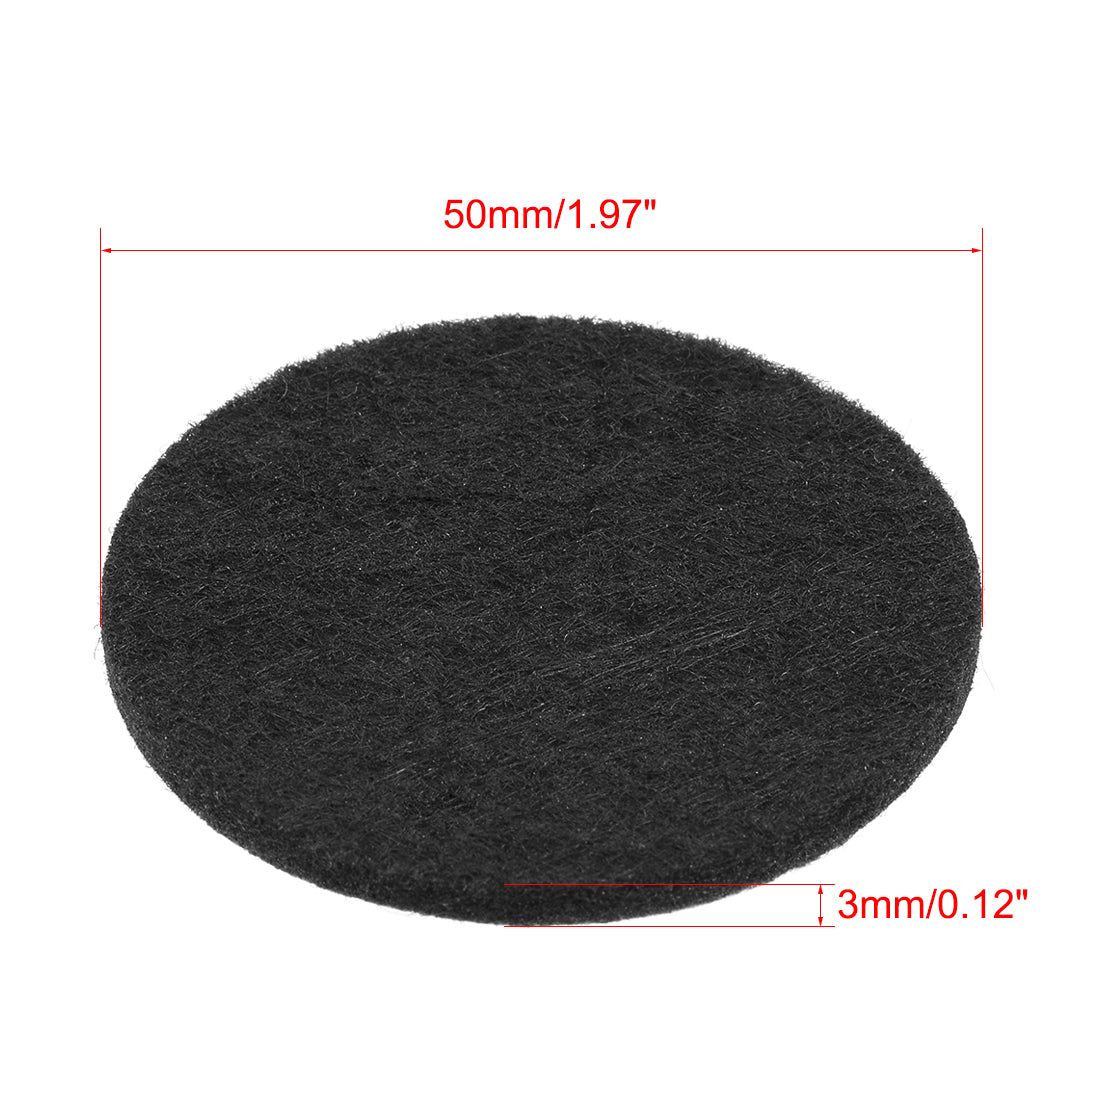 uxcell Uxcell Furniture Pads Adhesive Felt Pads 50mm Diameter 3mm Thick Round Black 12Pcs